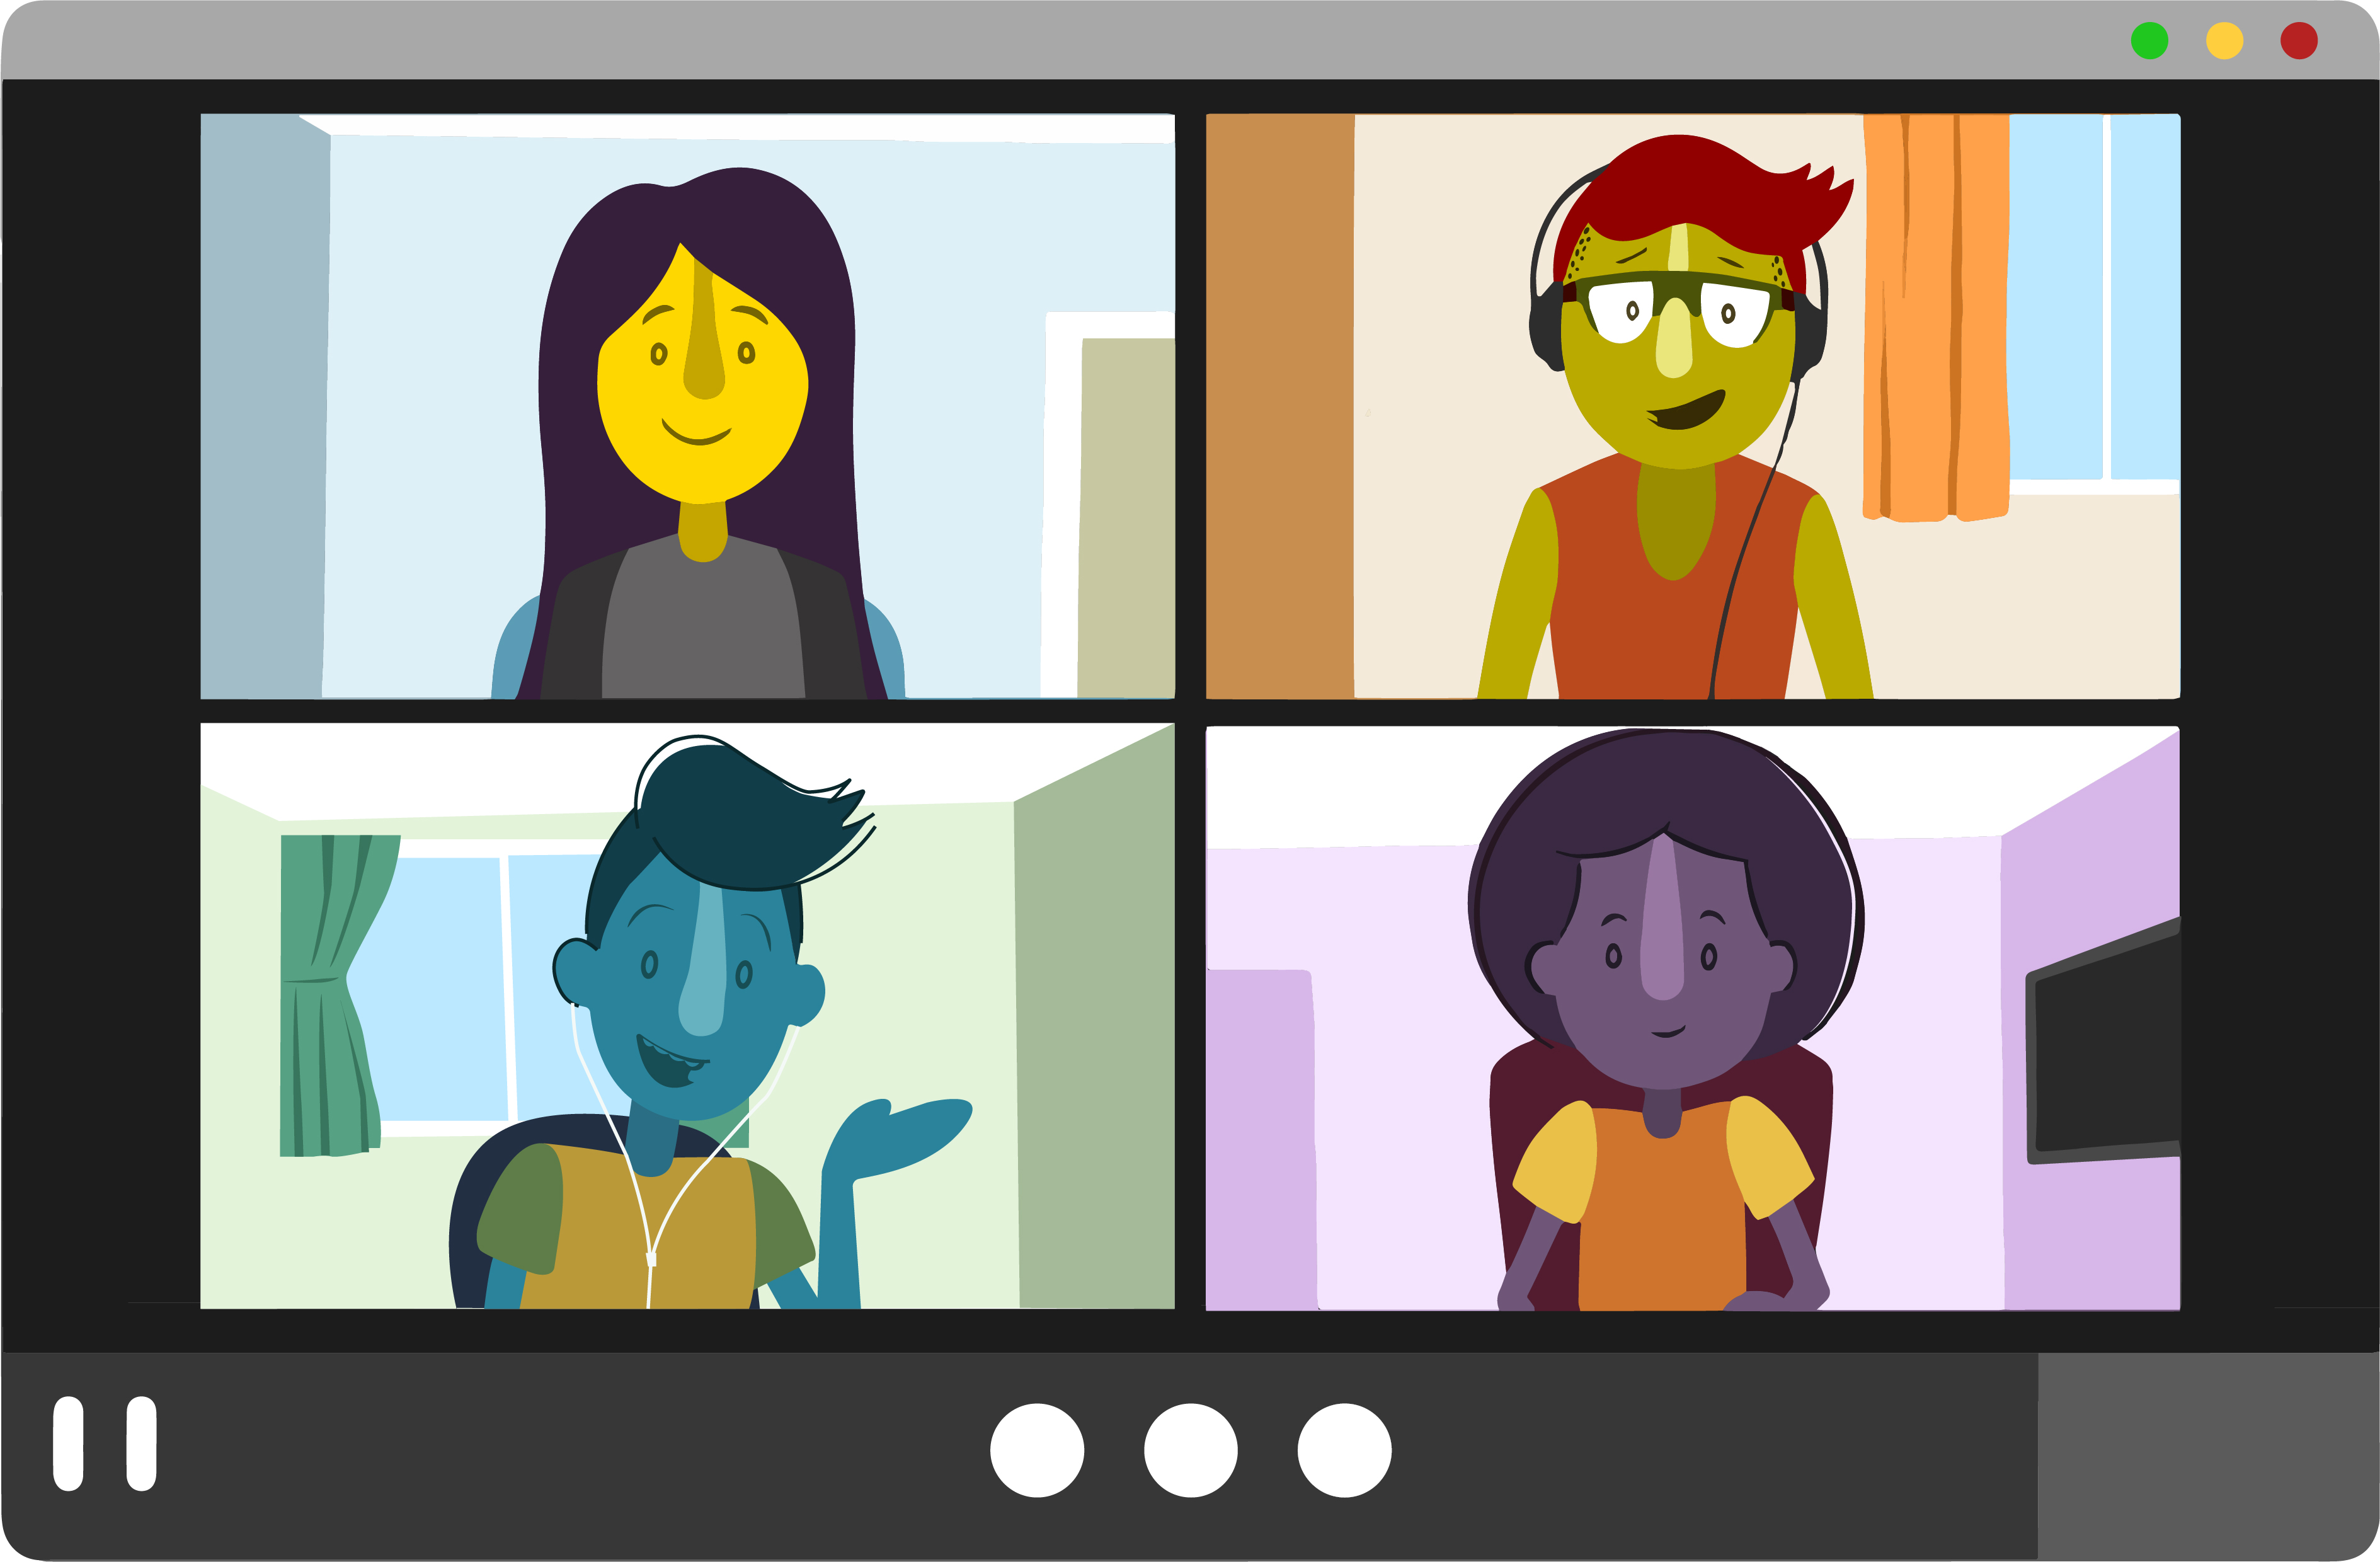 Picture of 4 people on a video call